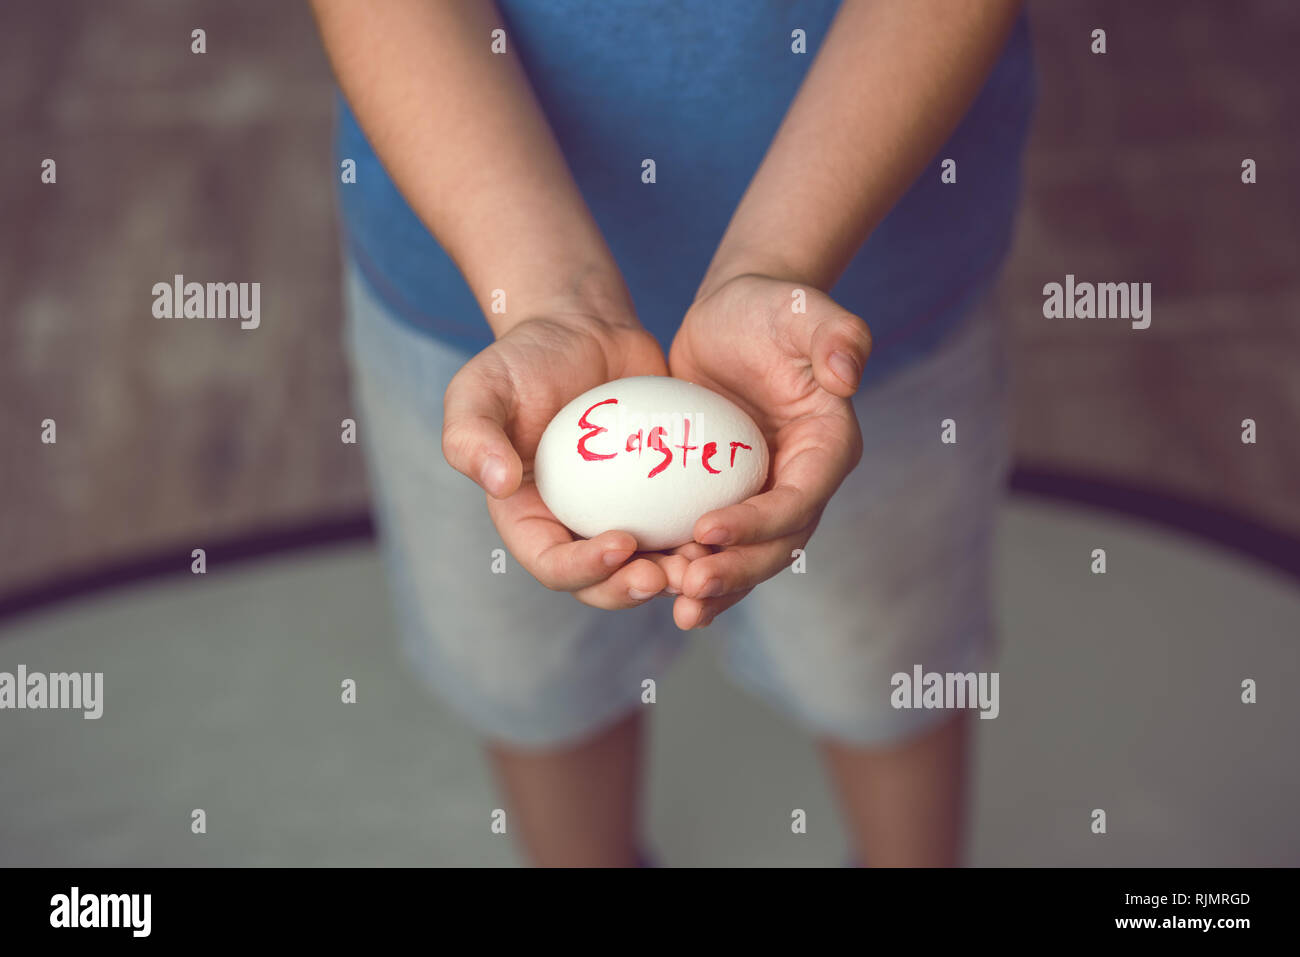 Eggs with the inscription Happy Easter the child holds in her hands in front of him. Stock Photo